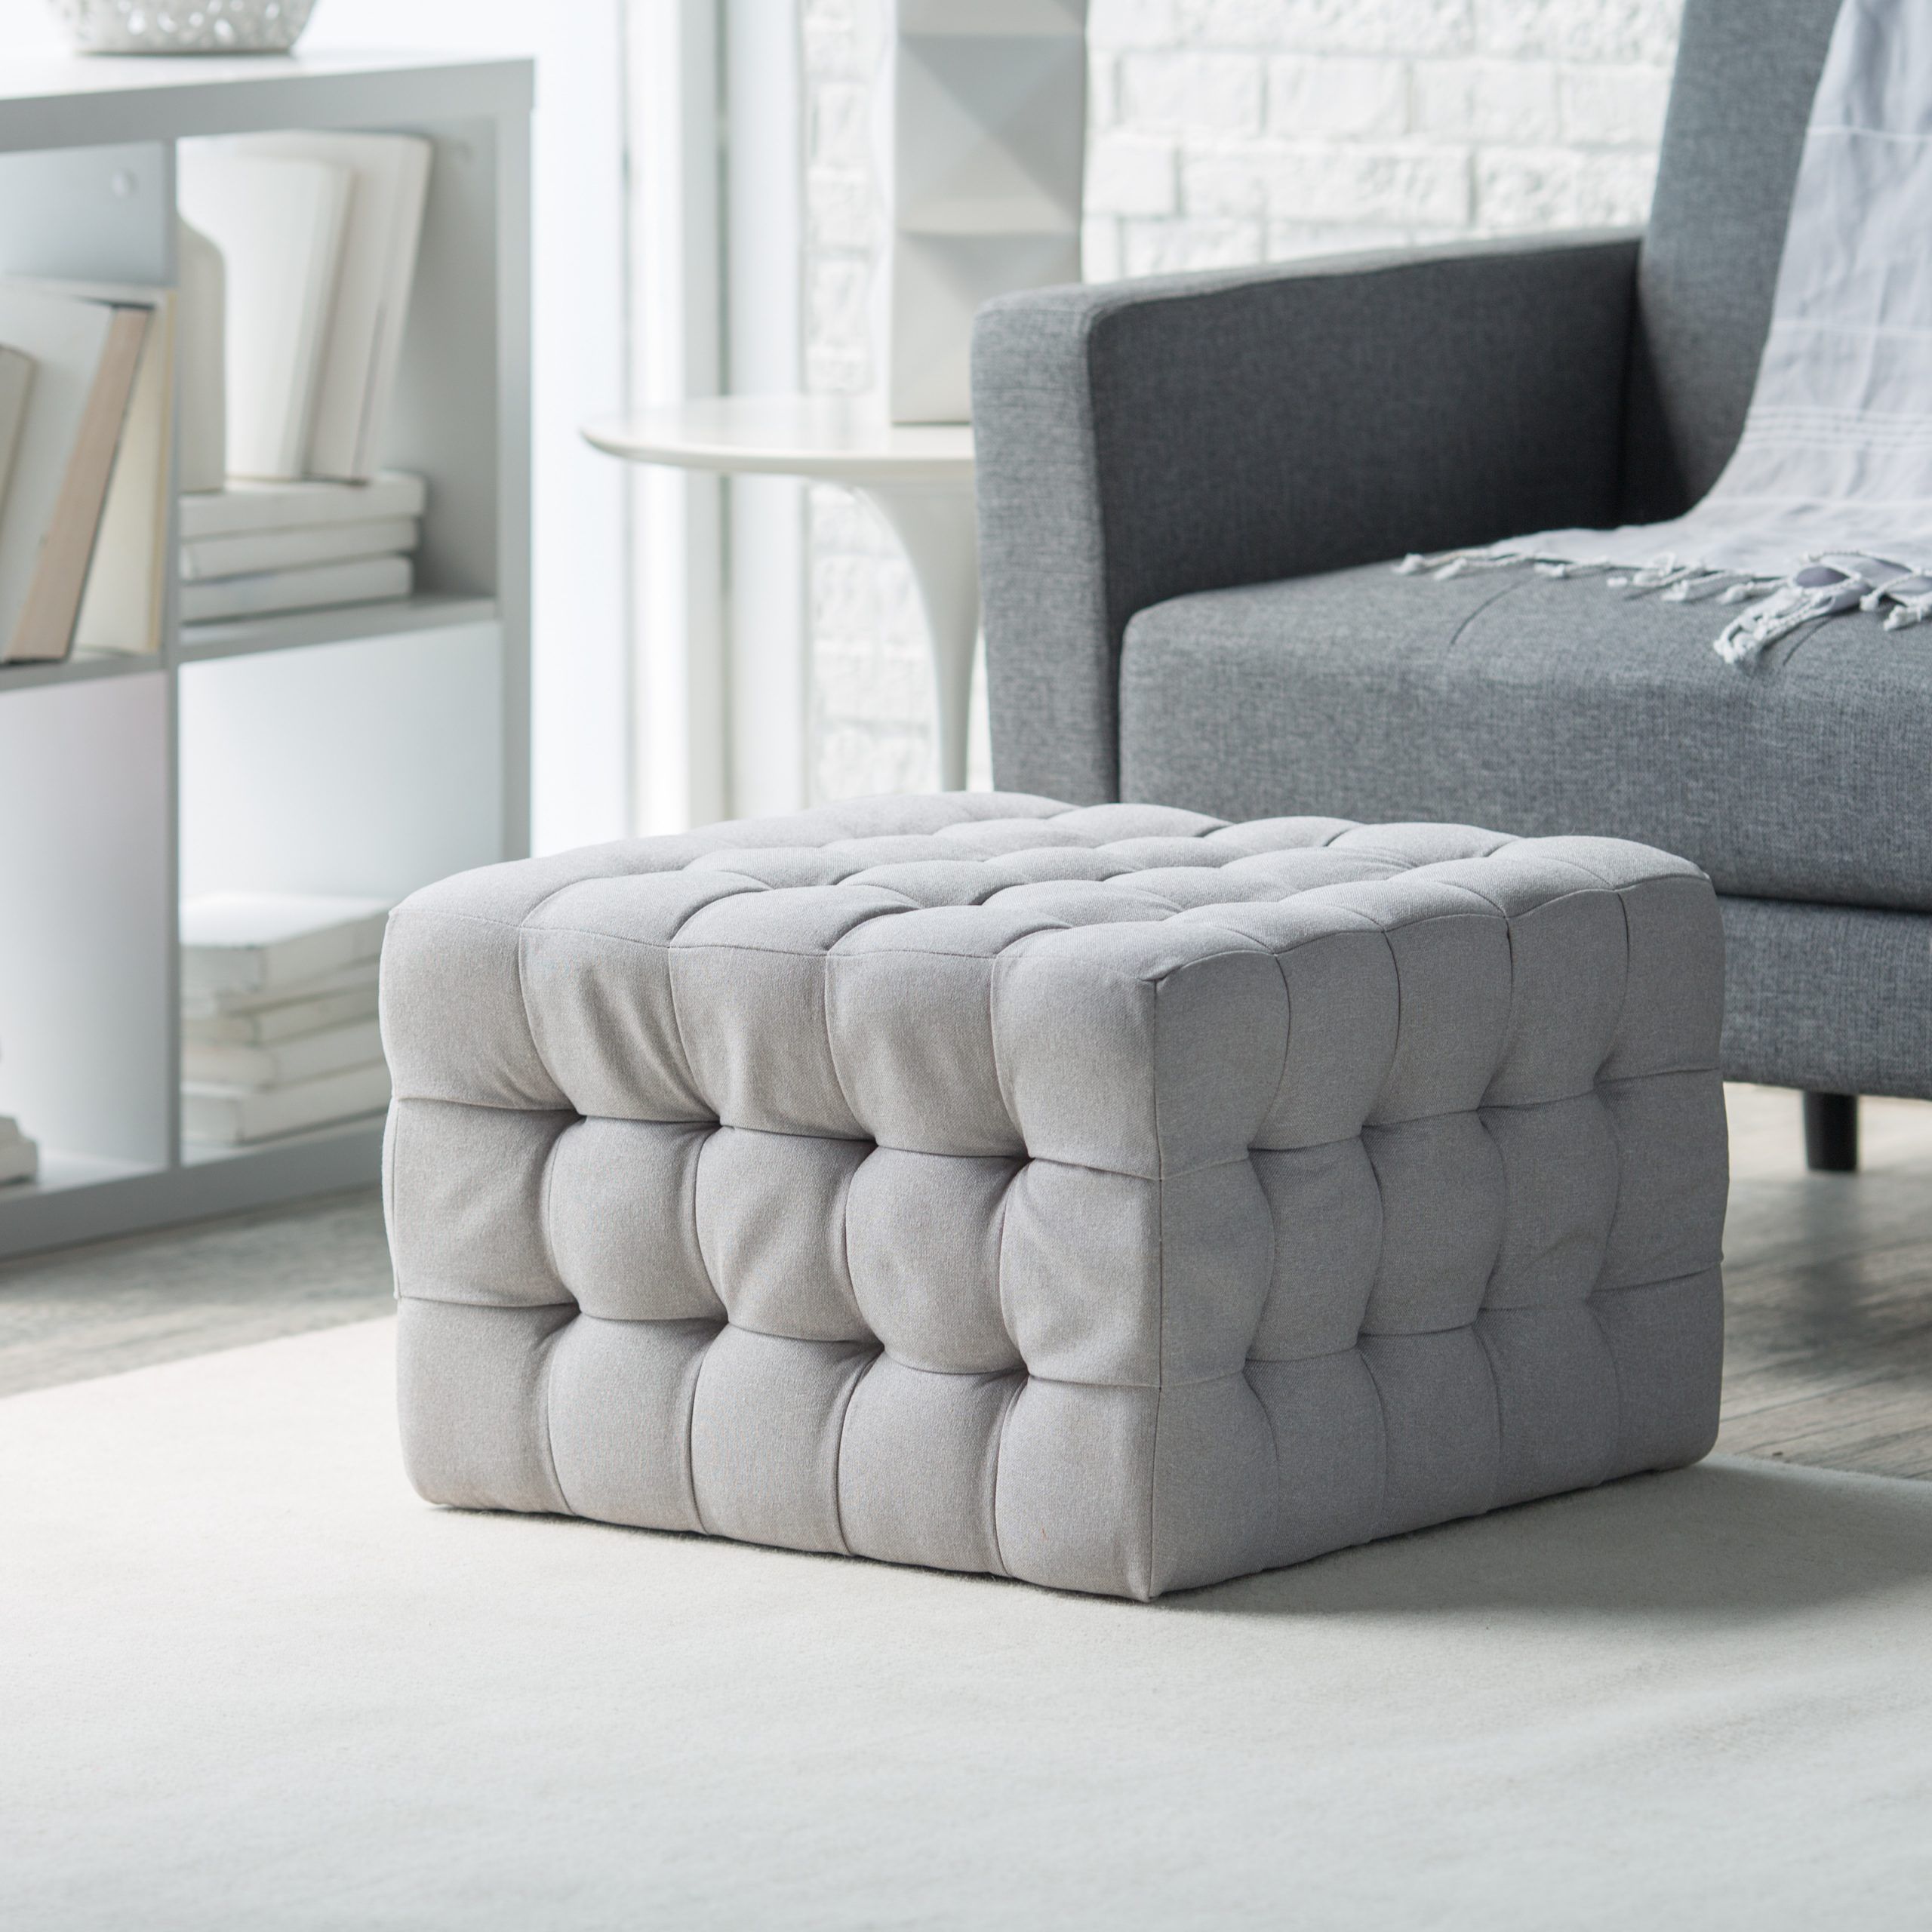 Natural Fabric Square Ottomans Within Latest Belham Living Allover Tufted Square Ottoman – Grey – Ottomans At Hayneedle (View 5 of 10)